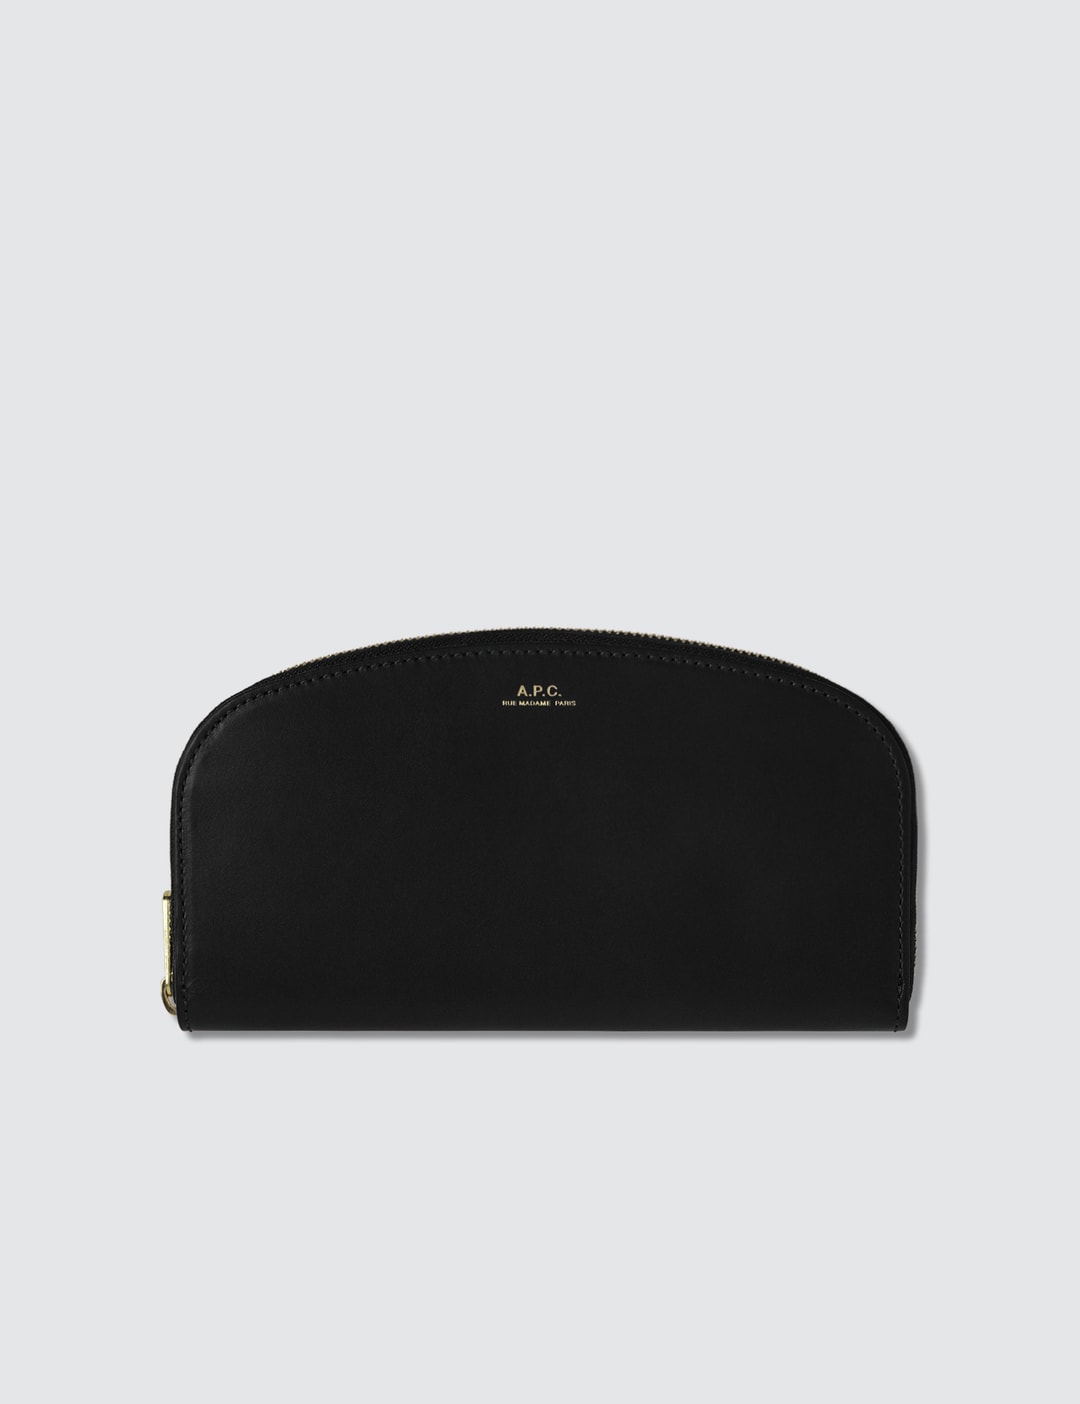 A.P.C. - Demi-lune Zip Long Wallet | HBX - Globally Curated Fashion and ...